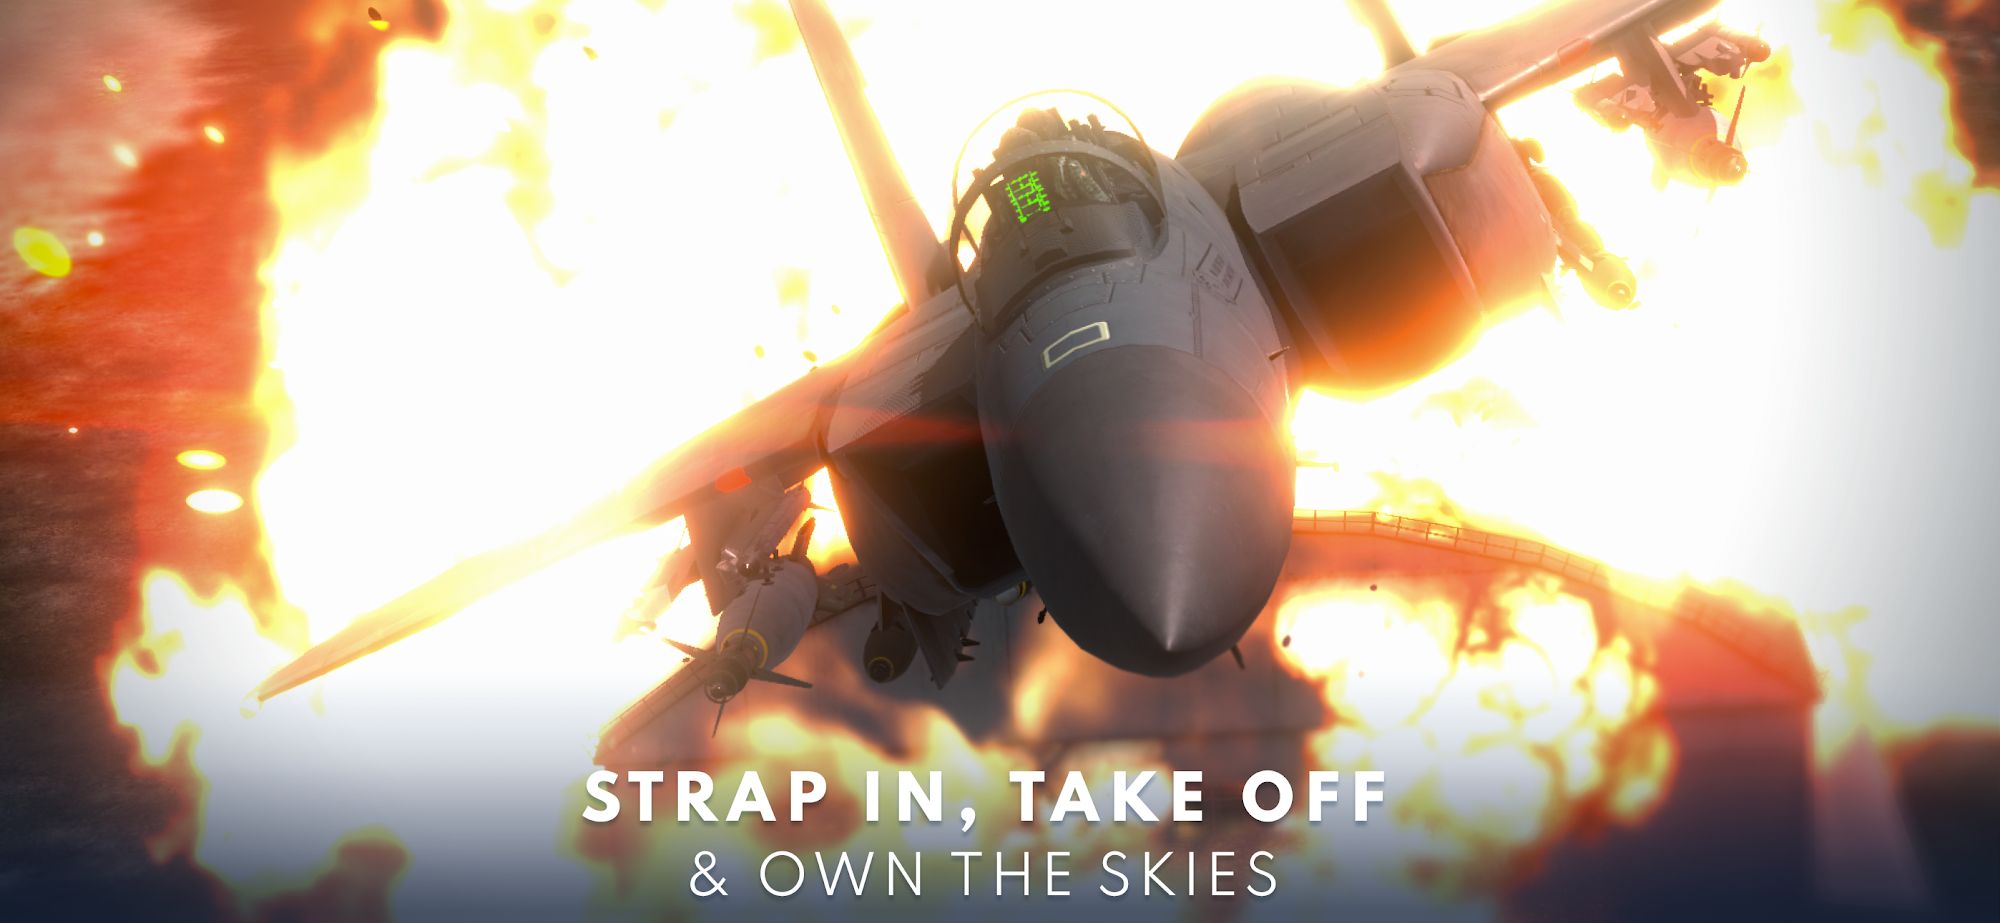 Full version of Android Flight simulator game apk Metalstorm for tablet and phone.